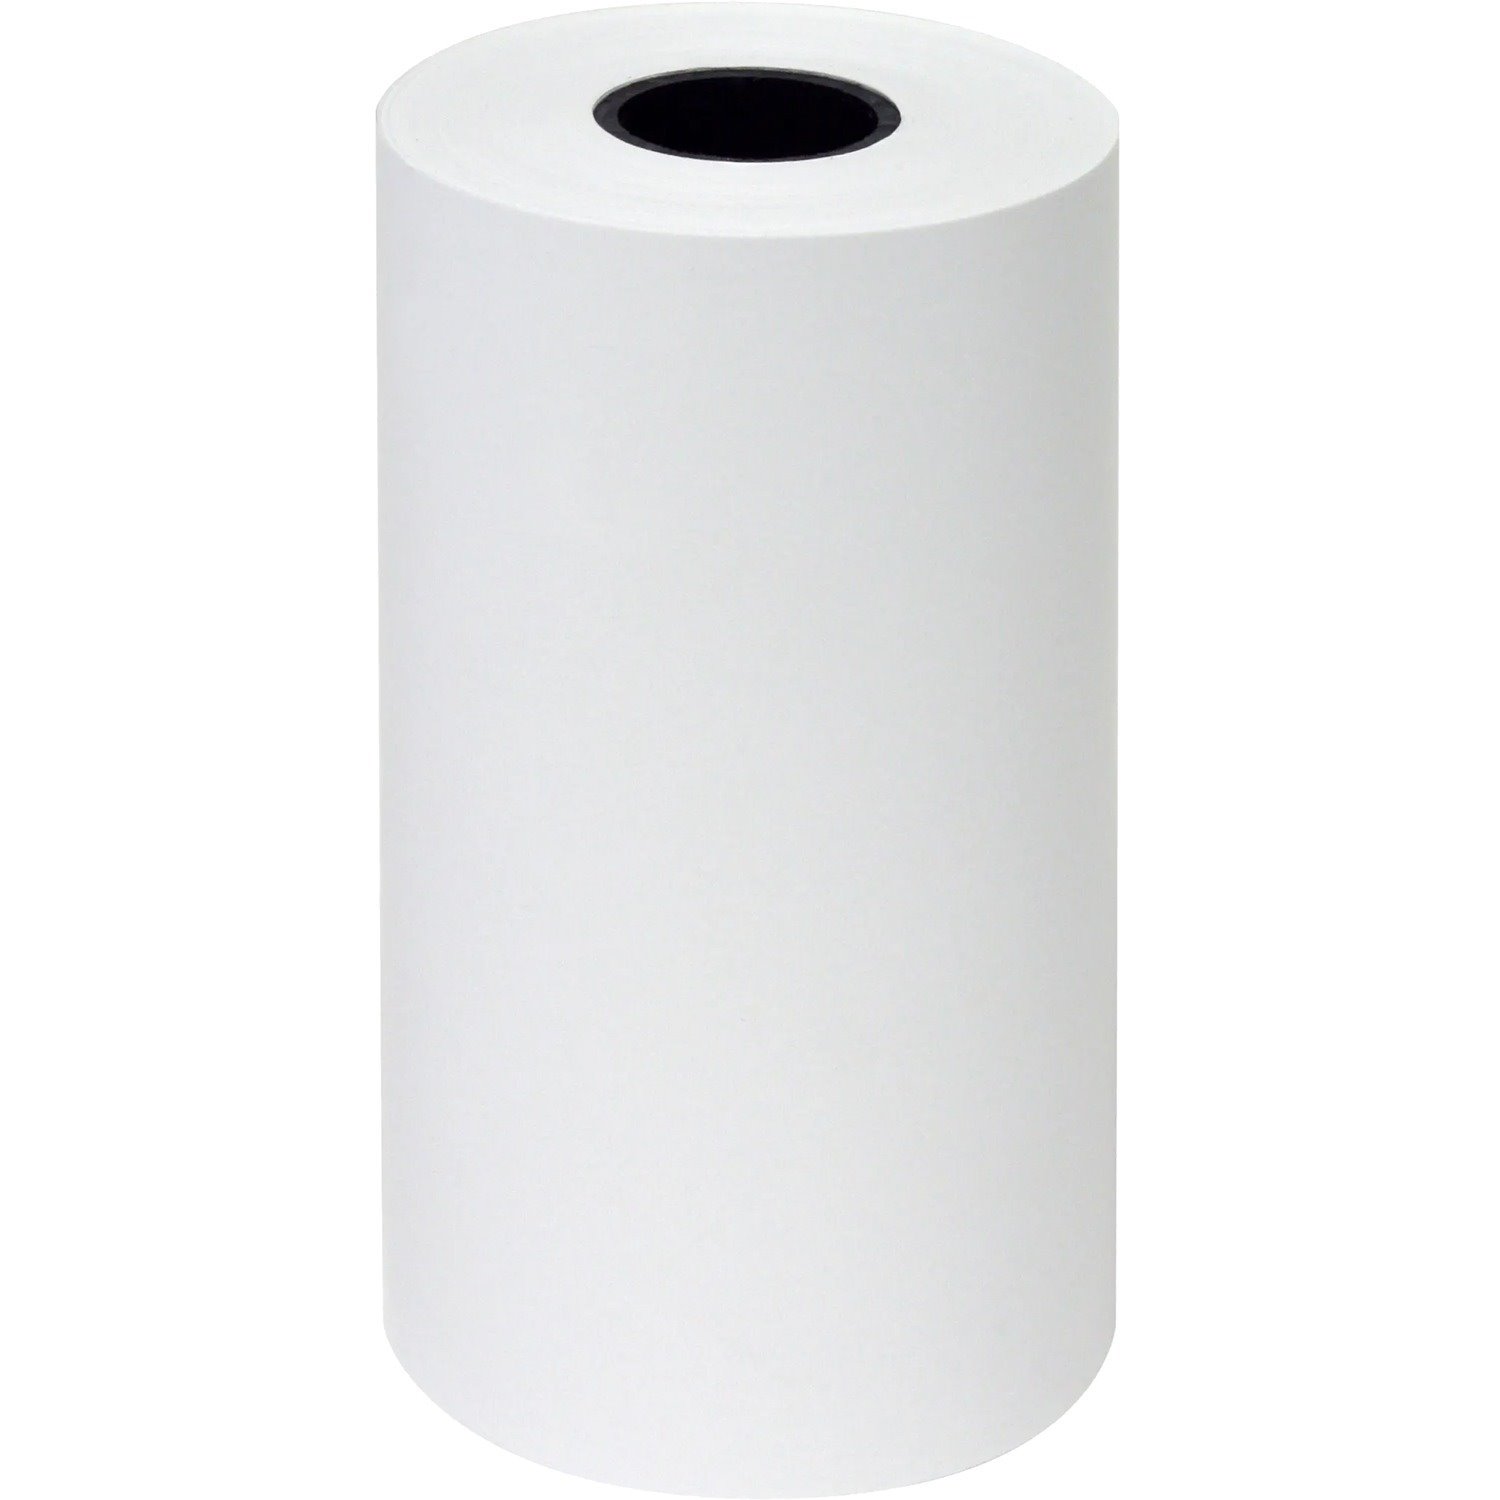 Brother Thermal Transfer Receipt Paper - White